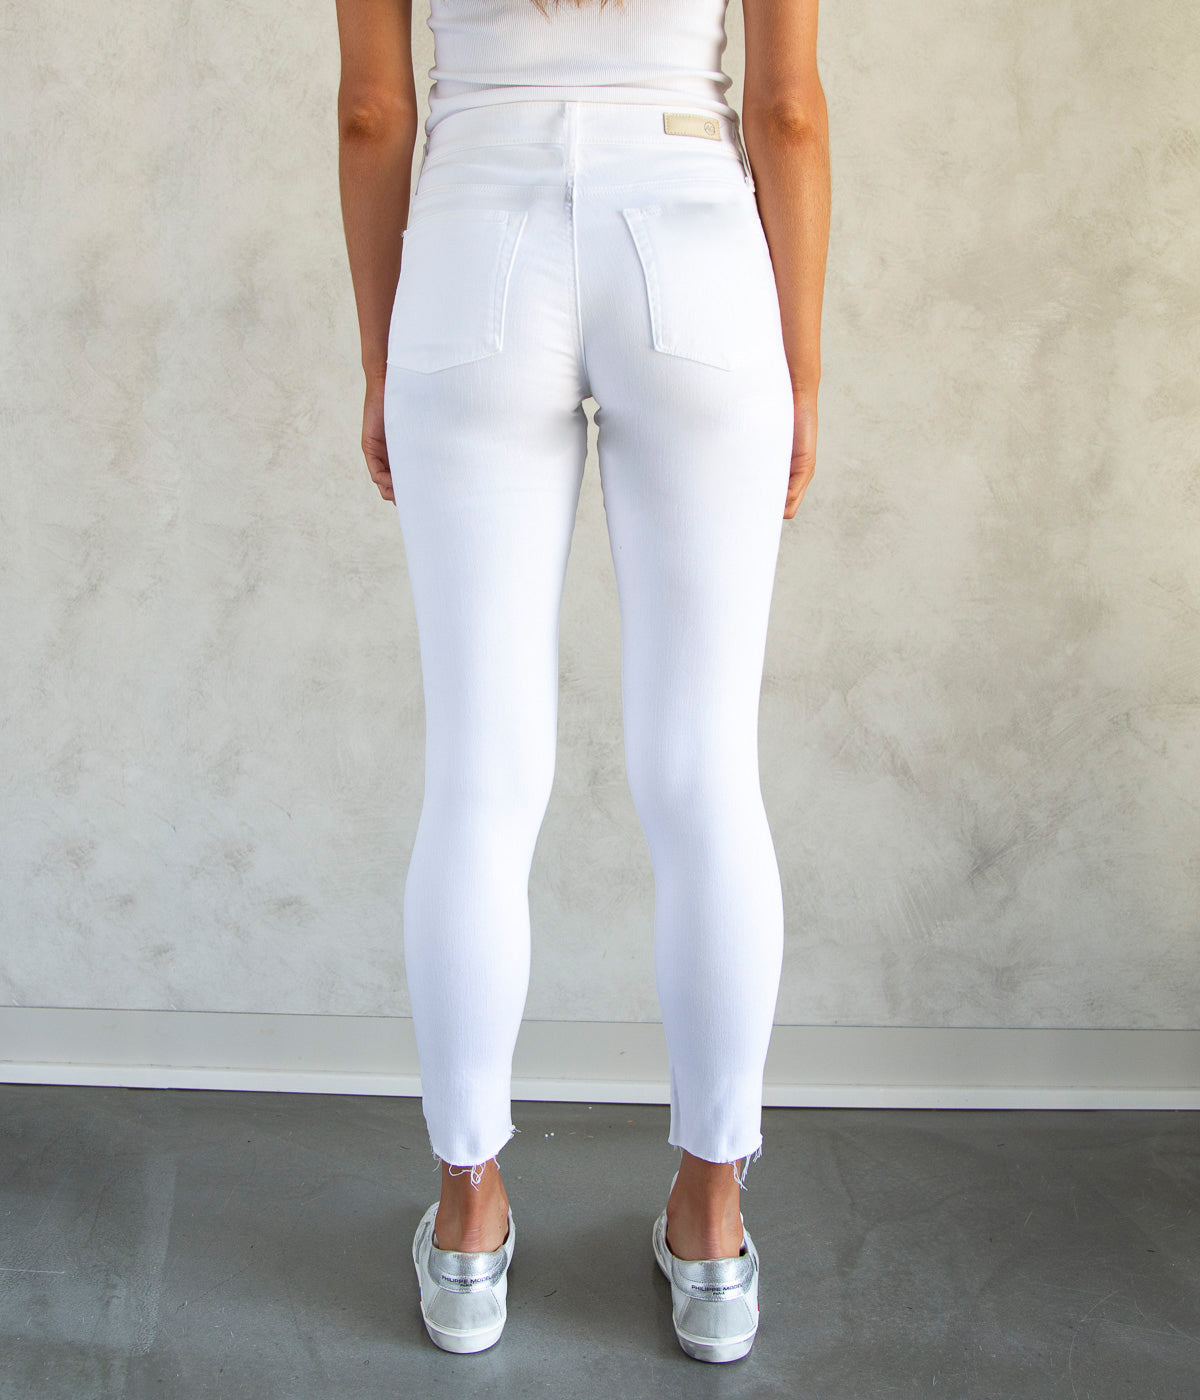 The Farrah Skinny Ankle Jean in Unchartered White